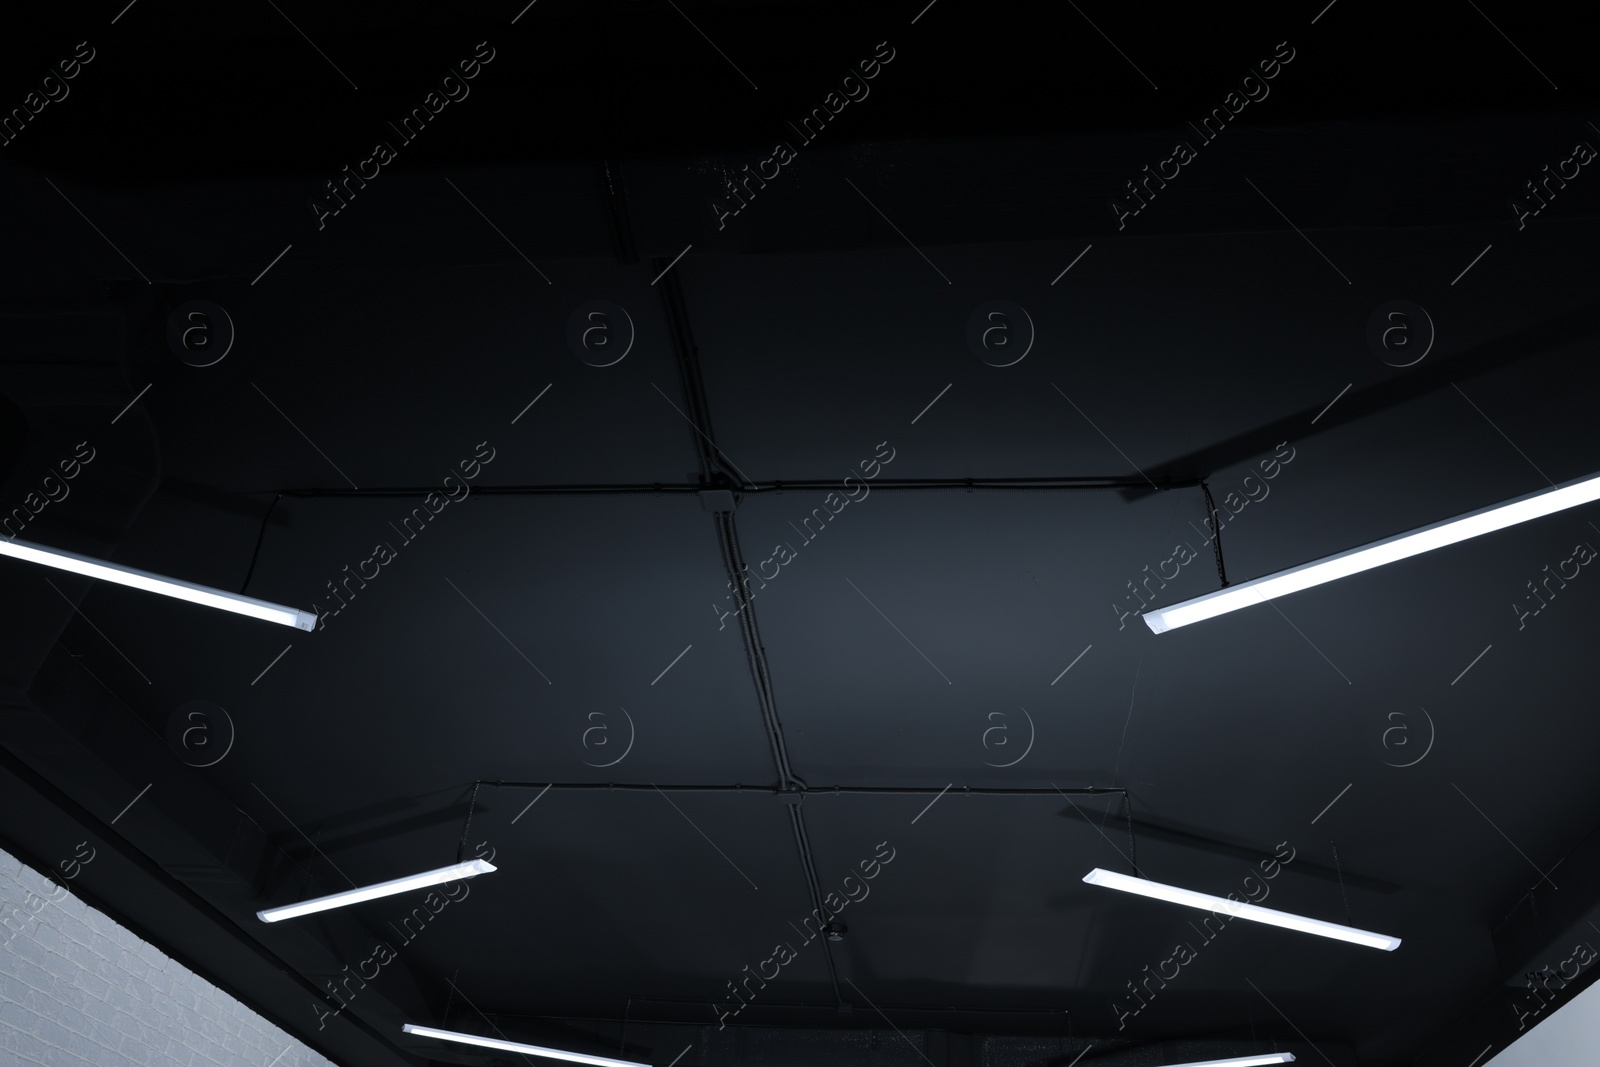 Photo of Ceiling with modern lights in renovated room